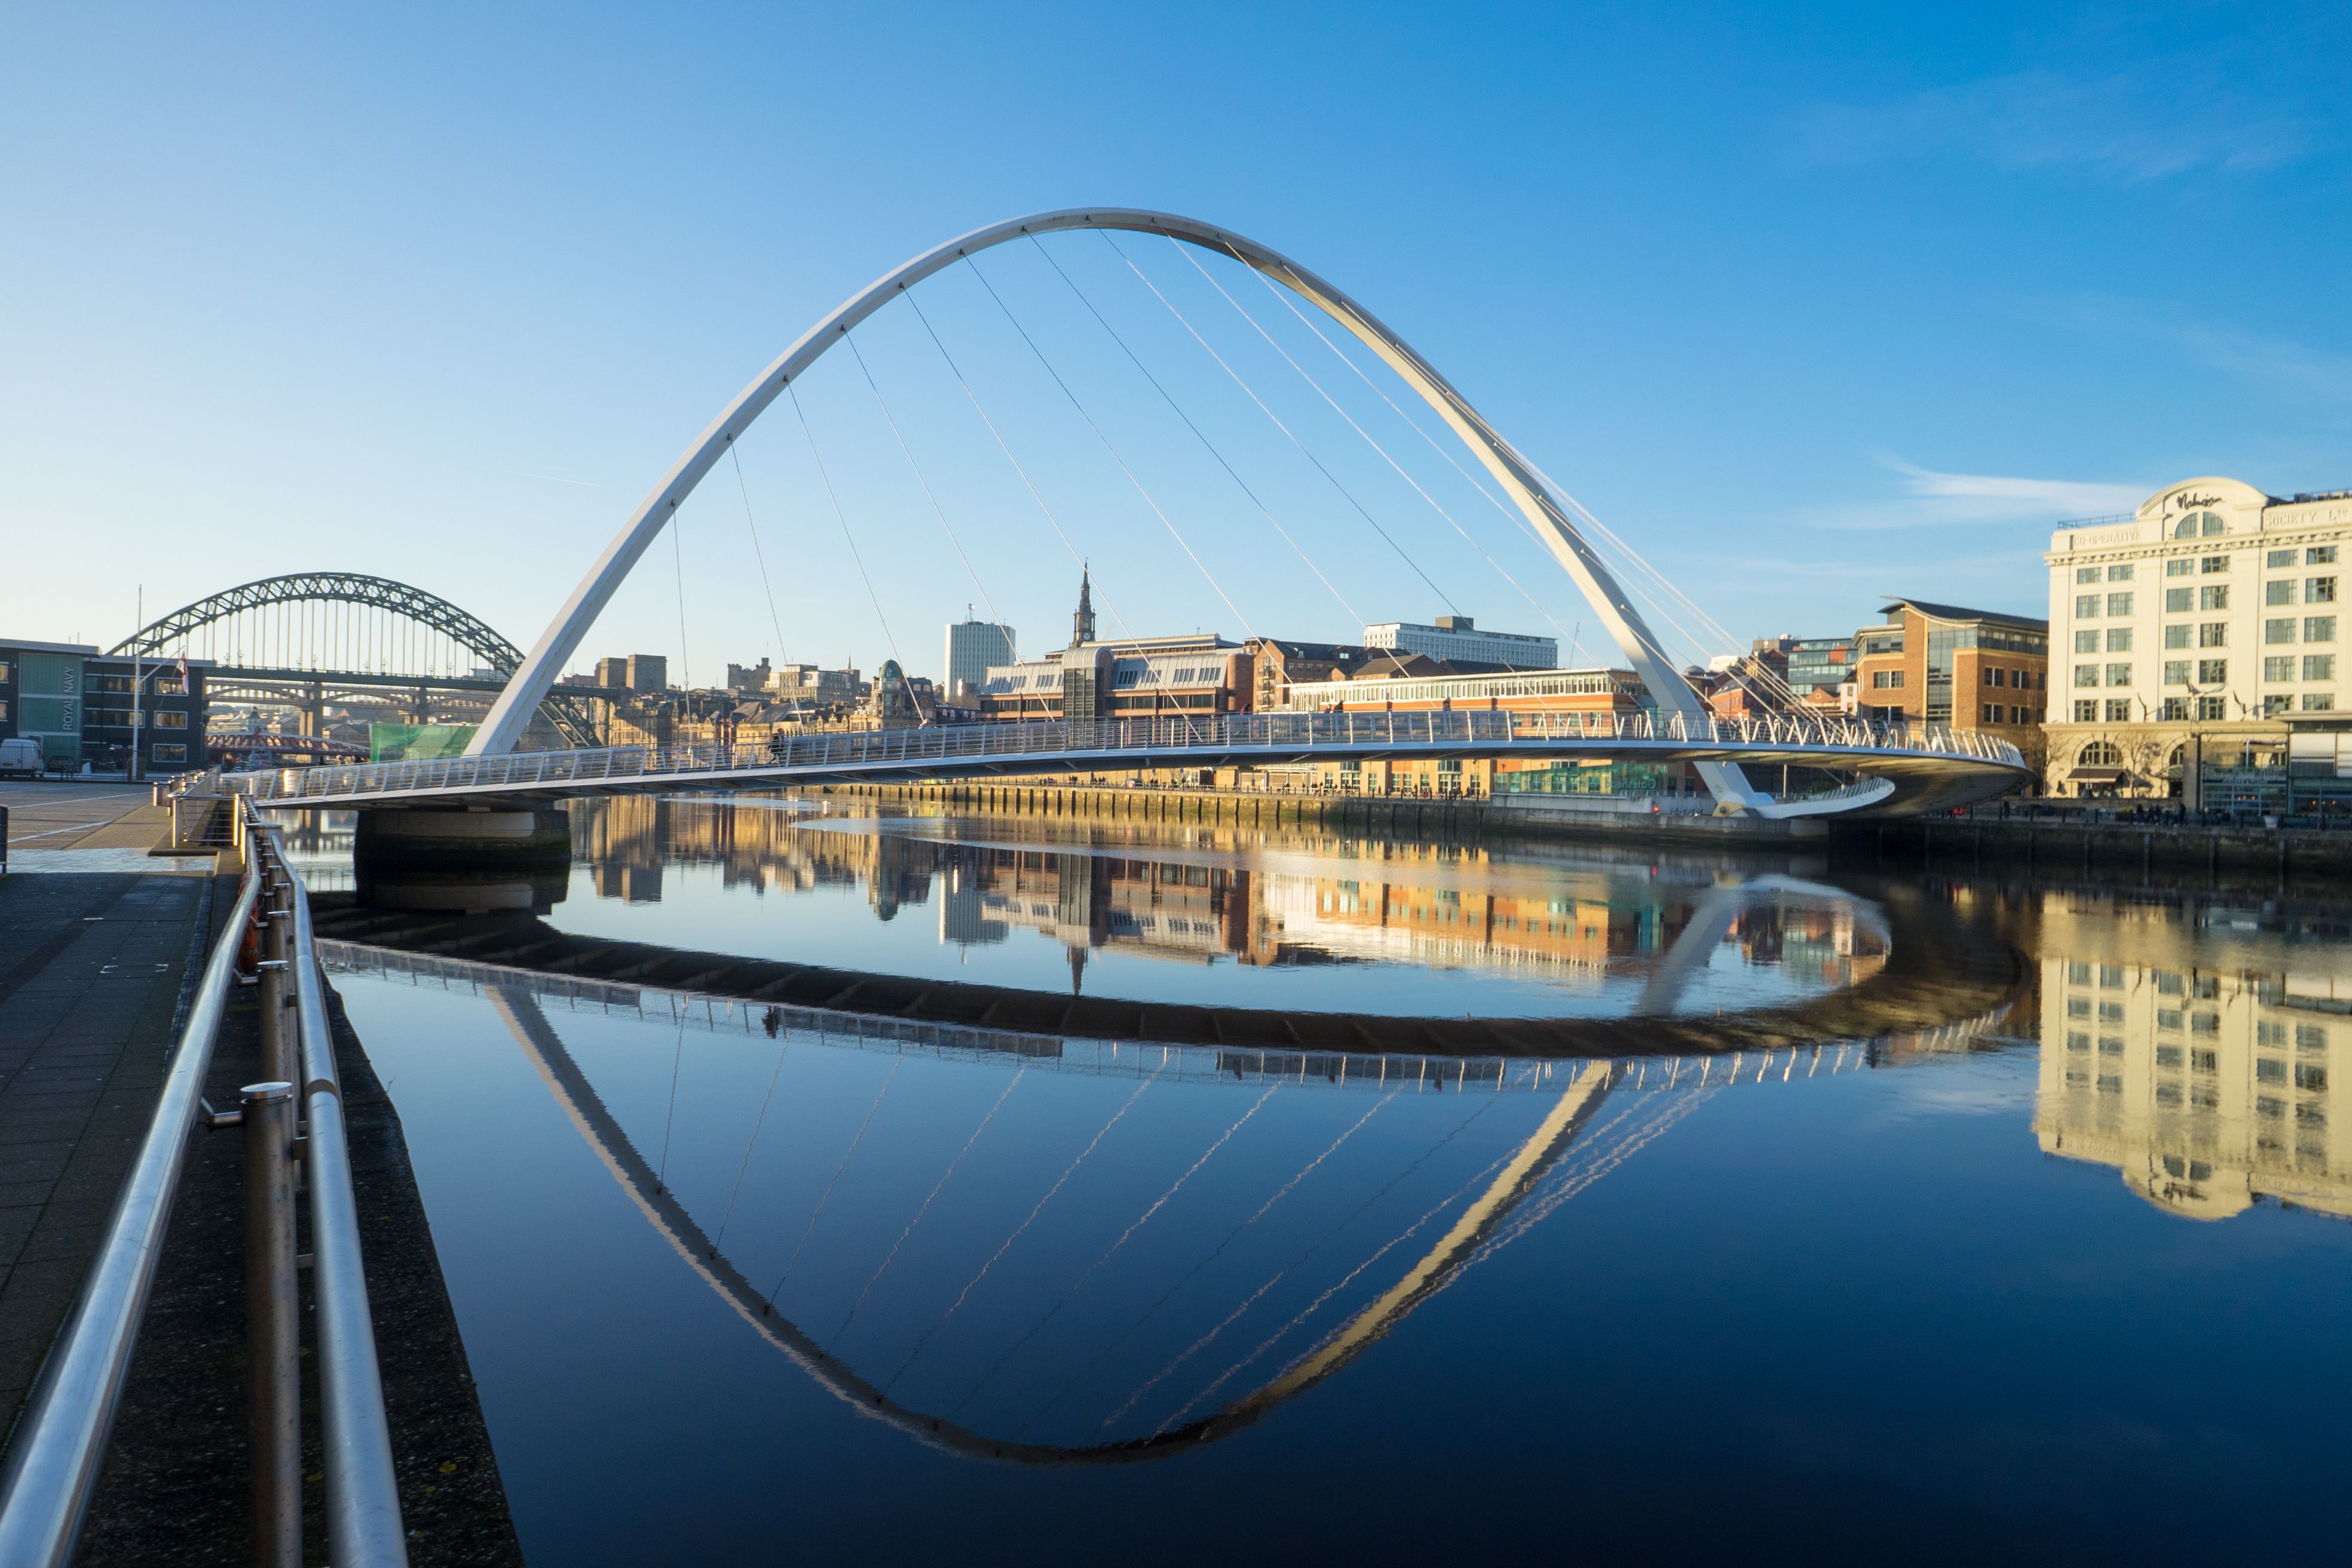 Best photo places in Newcastle spots you’ll want to snap image 1